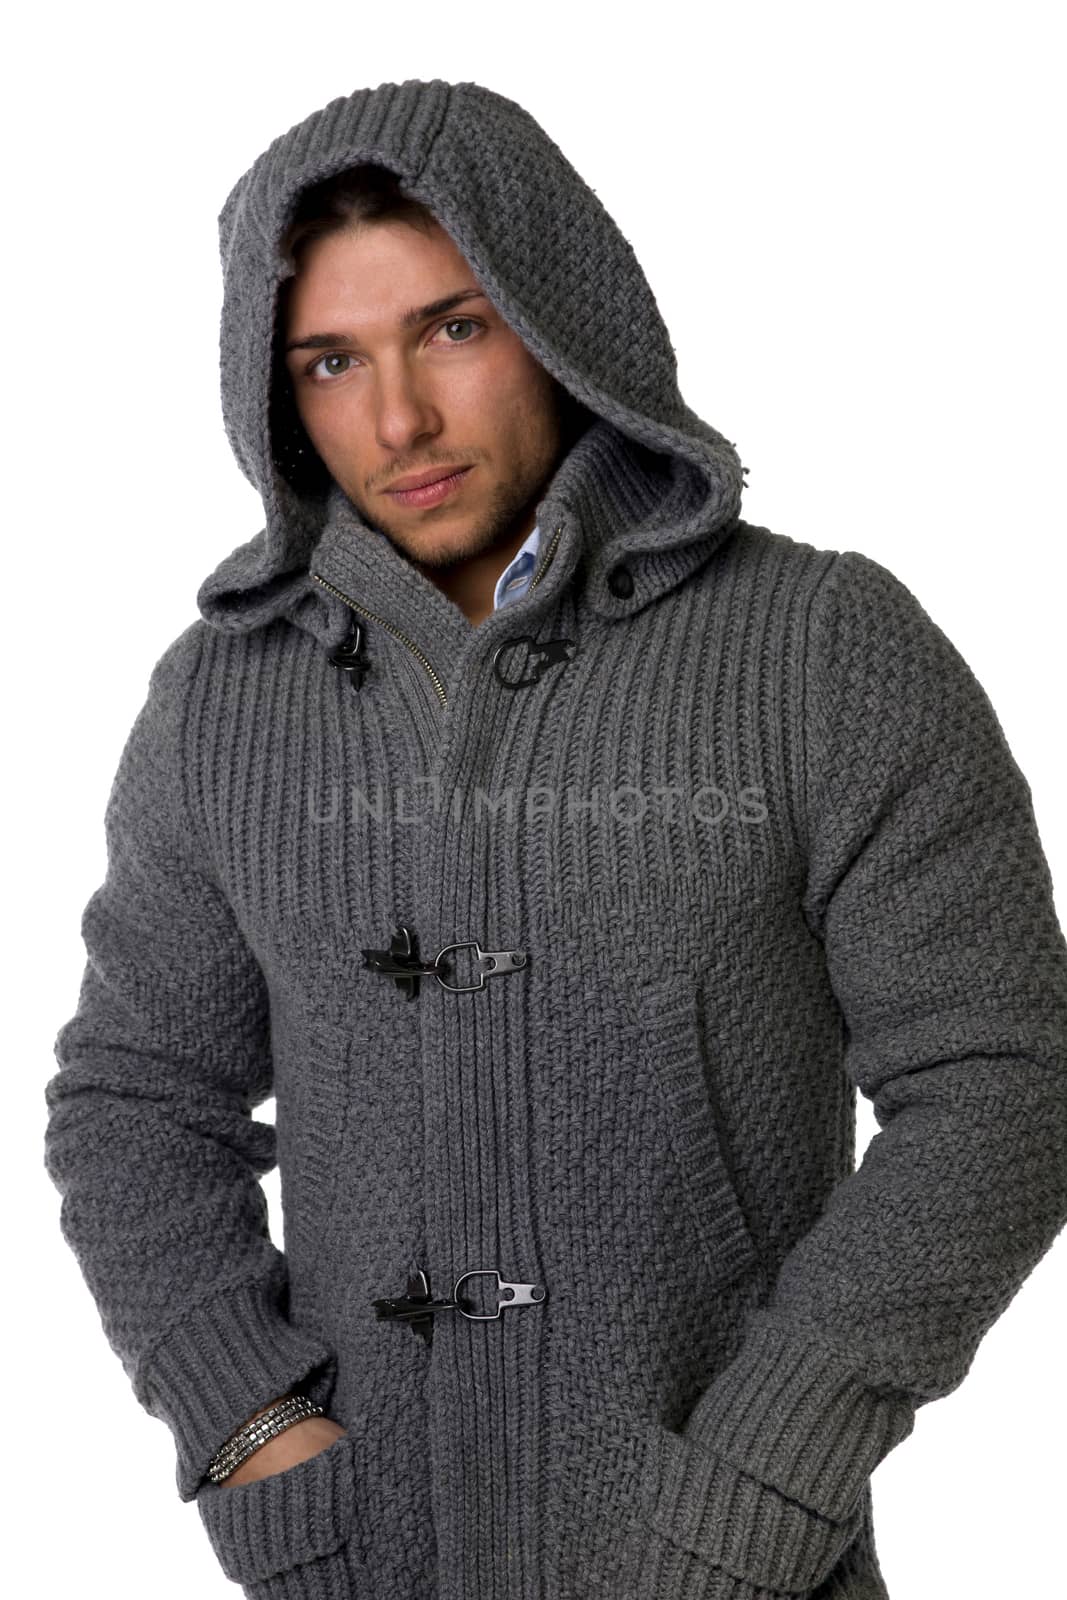 Good looking young man wearing winter hoodie sweater on shirt